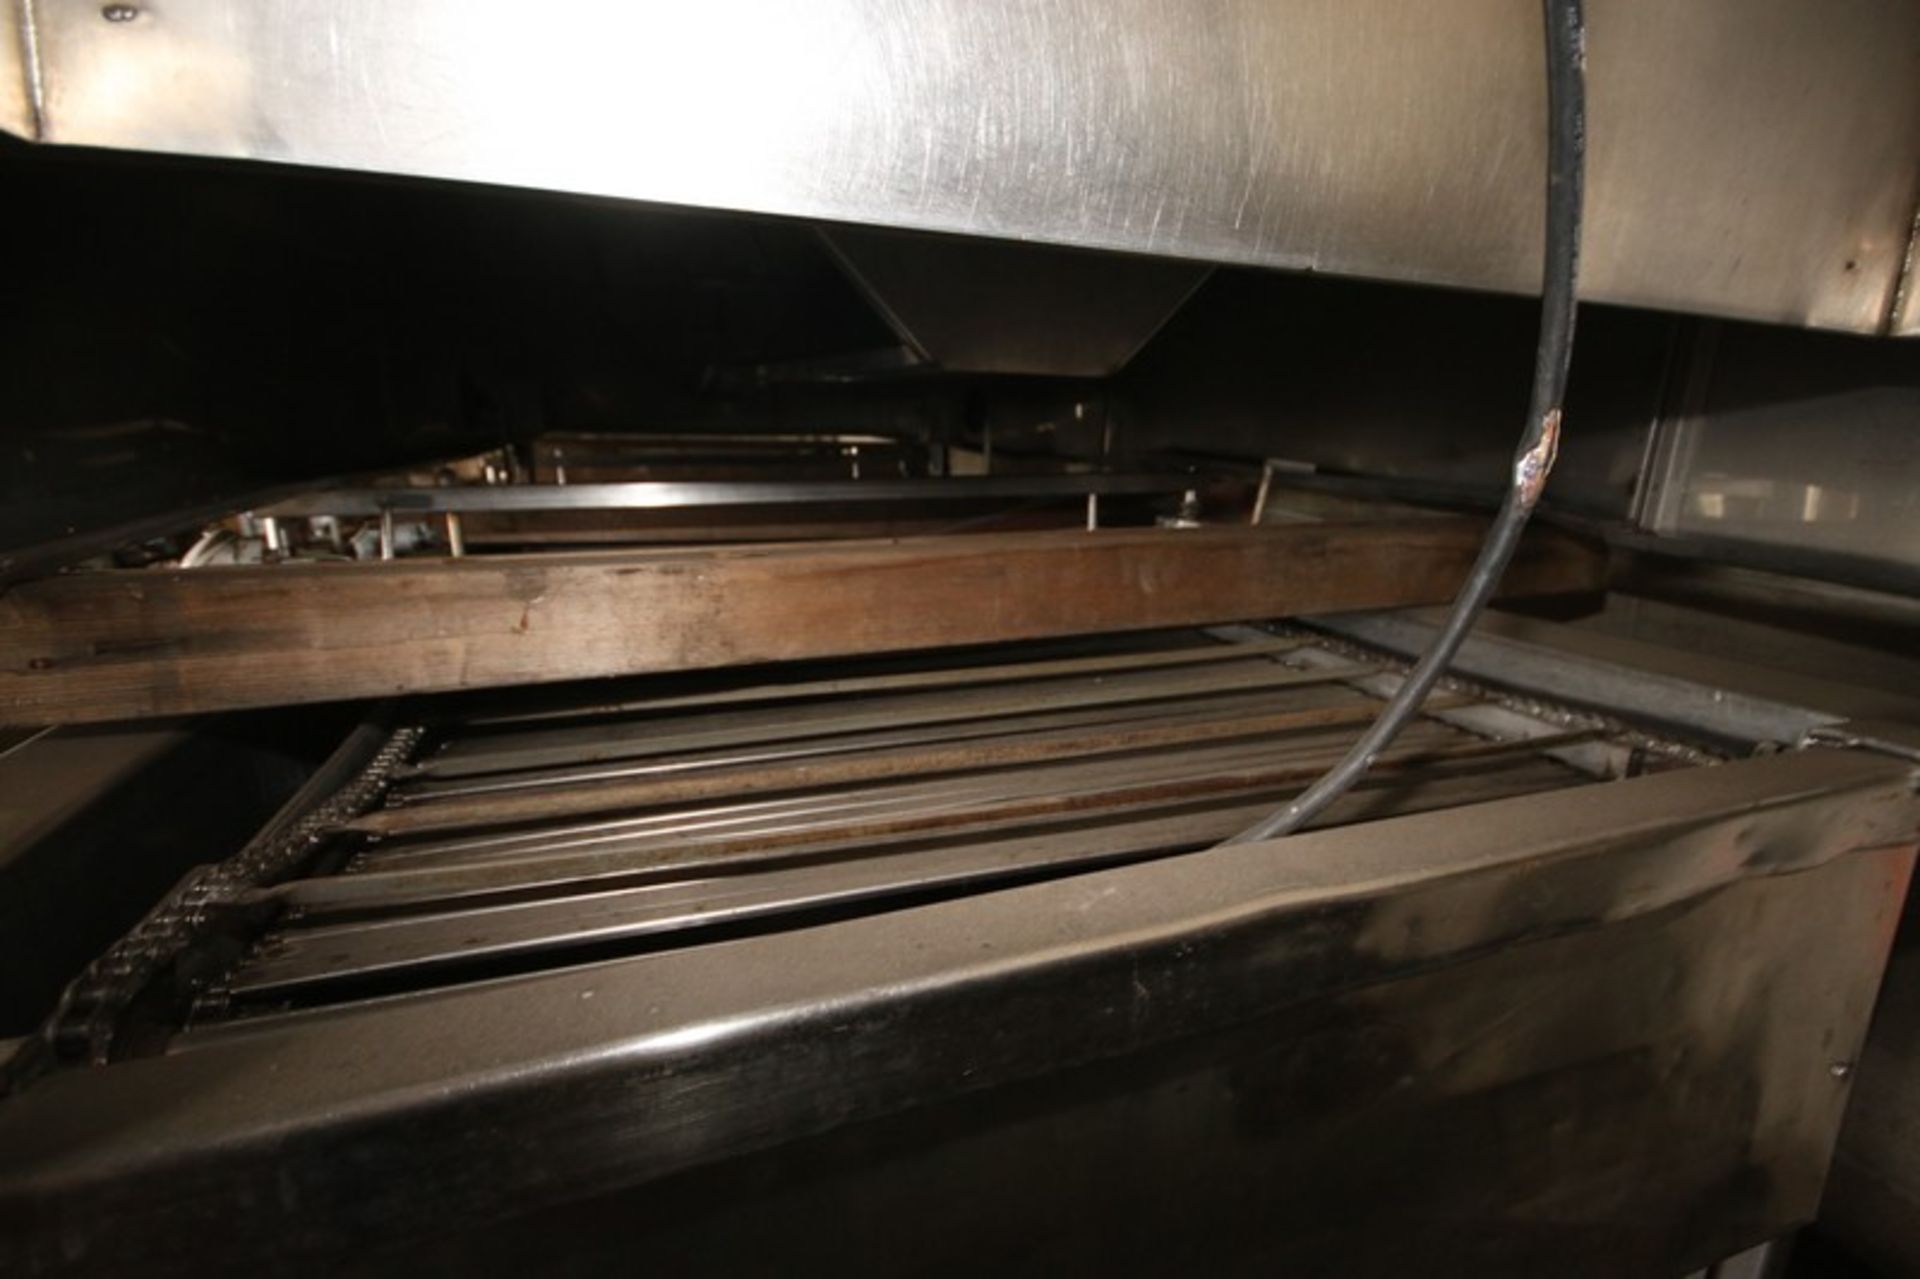 Higgs S/S Conveyor Bakery Fryer, Natural Gas Heated, 14' L x 54"W, Includes Exhaust Hood & Control - Image 3 of 11